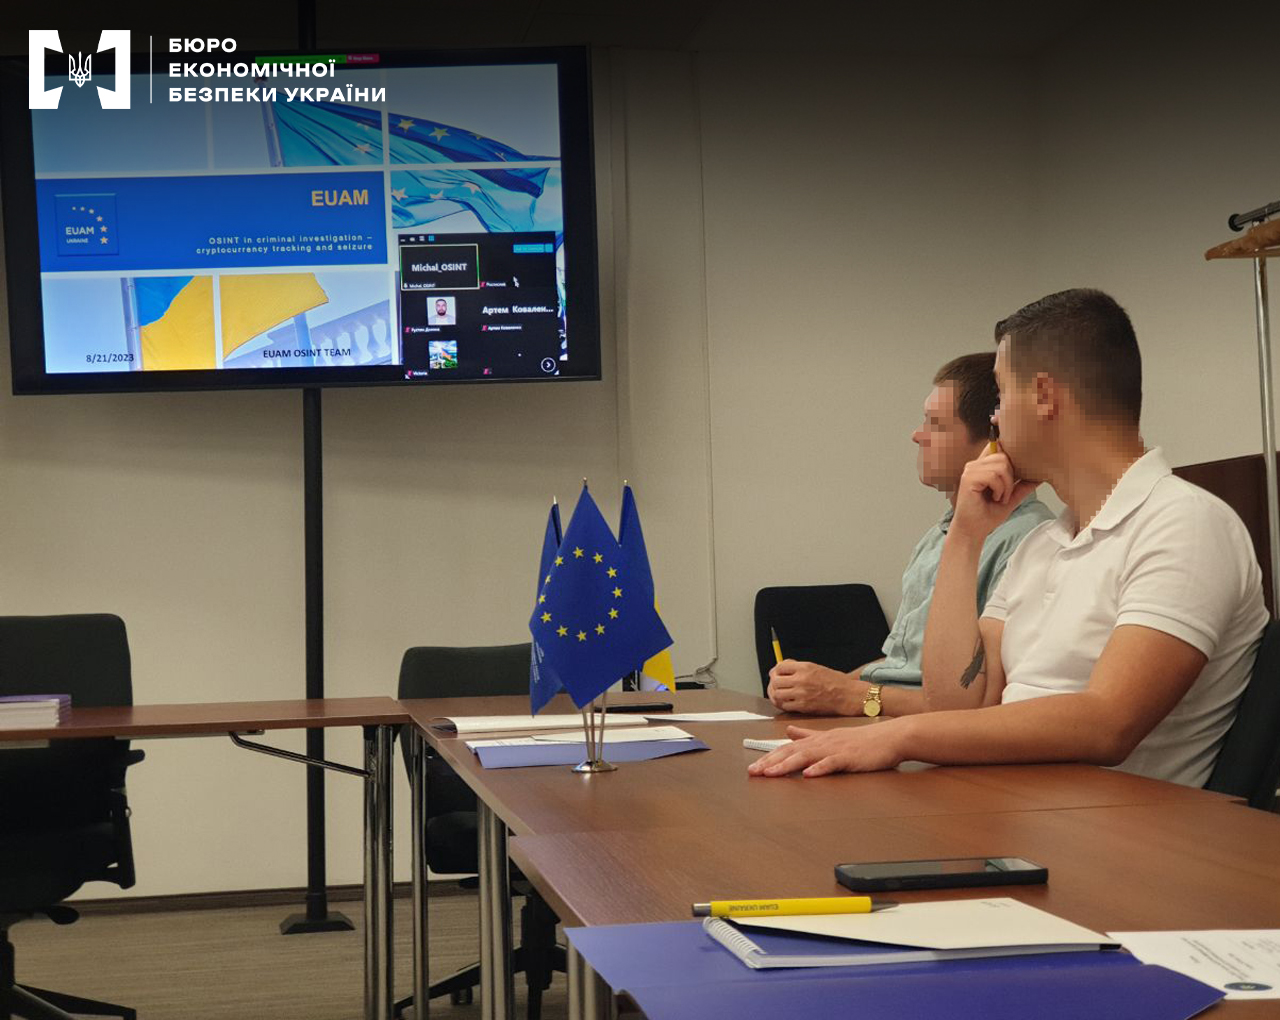 Ukrainian officers in Lviv, Ukraine, attend a training session on crypto hosted by EU officials.